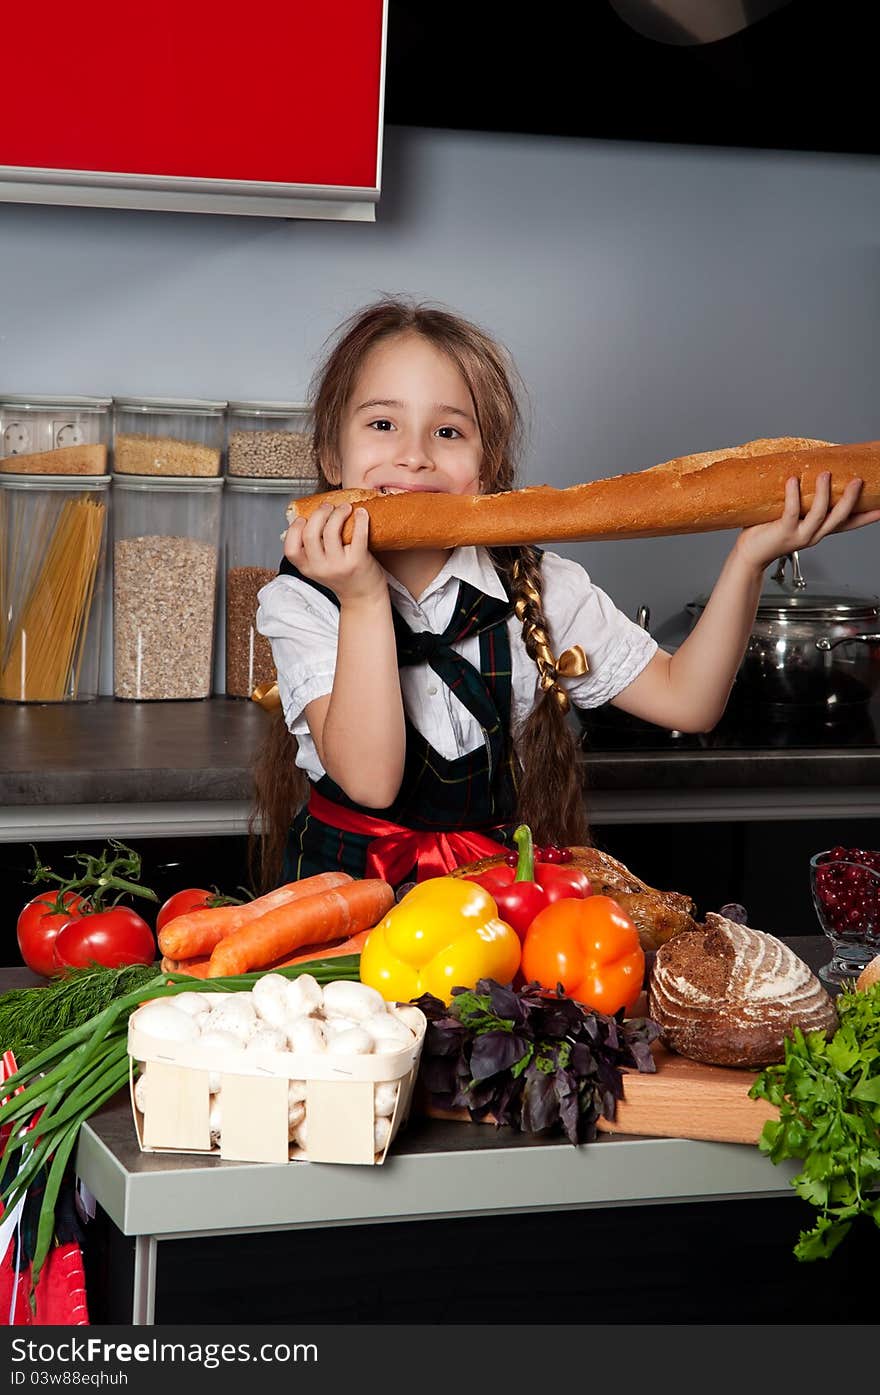 The little girl in the kitchen of chef uniforms baguette bread bites against the kitchen table with fresh produce